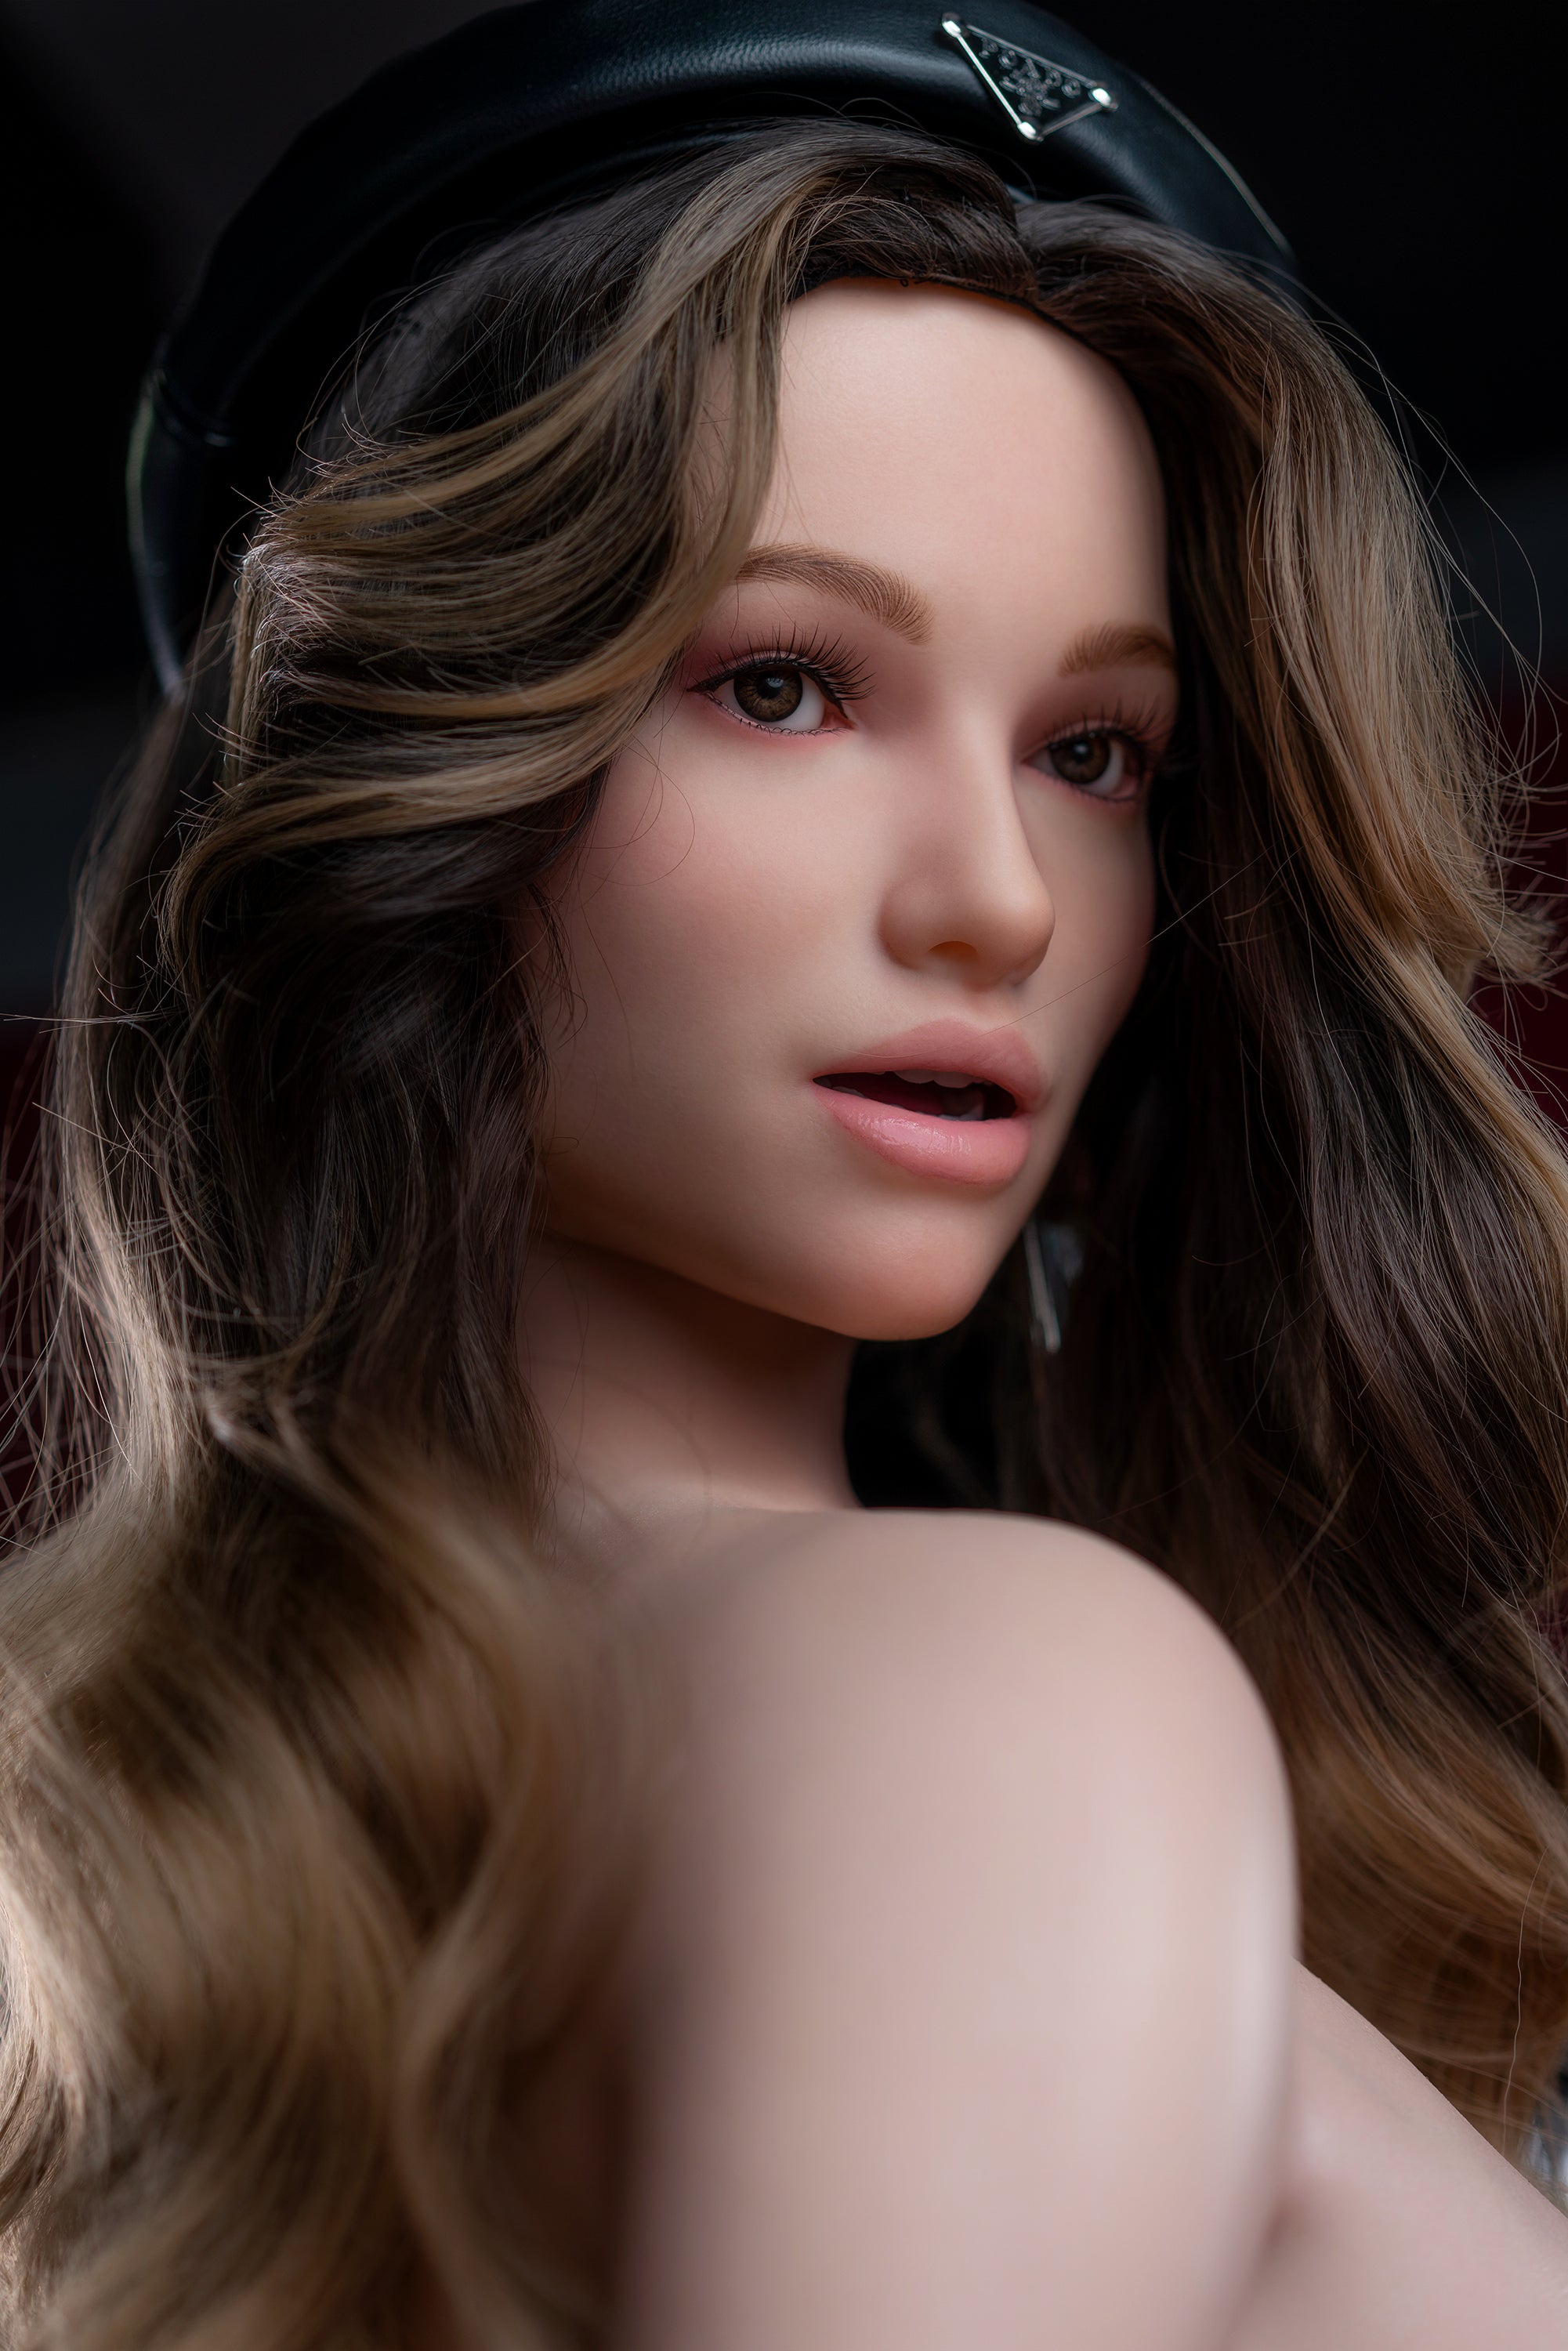 Zelex Doll Inspiration 175 cm E Silicone - Ulrica (Movable Jaws) | Buy Sex Dolls at DOLLS ACTUALLY